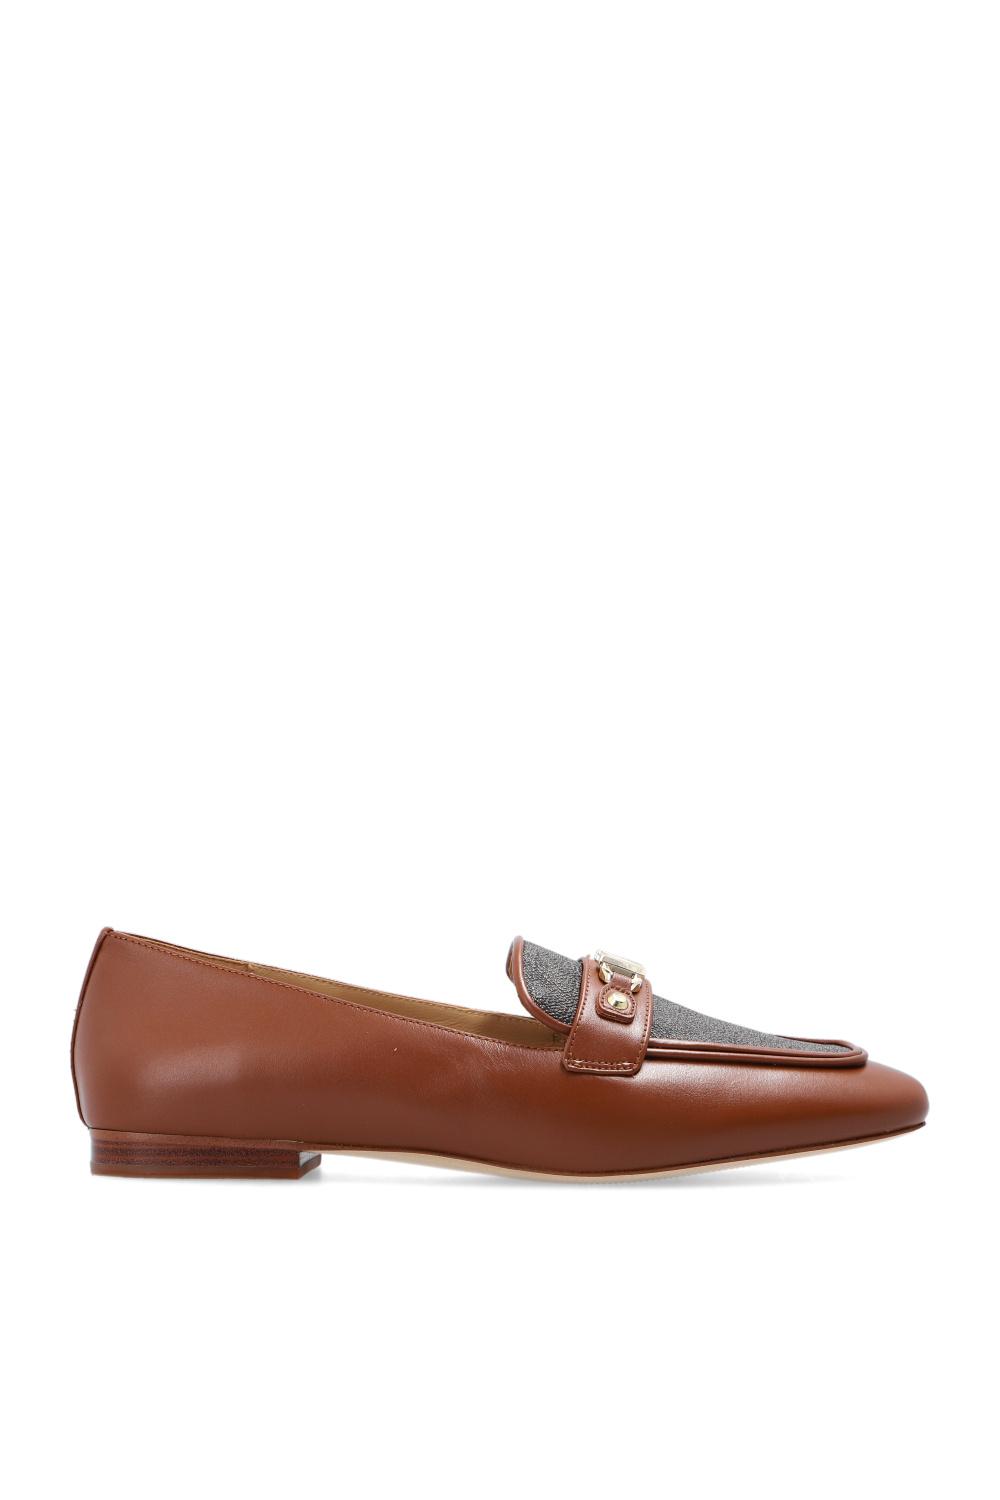 MICHAEL Michael Kors 'farrah' Leather Loafers in Brown | Lyst